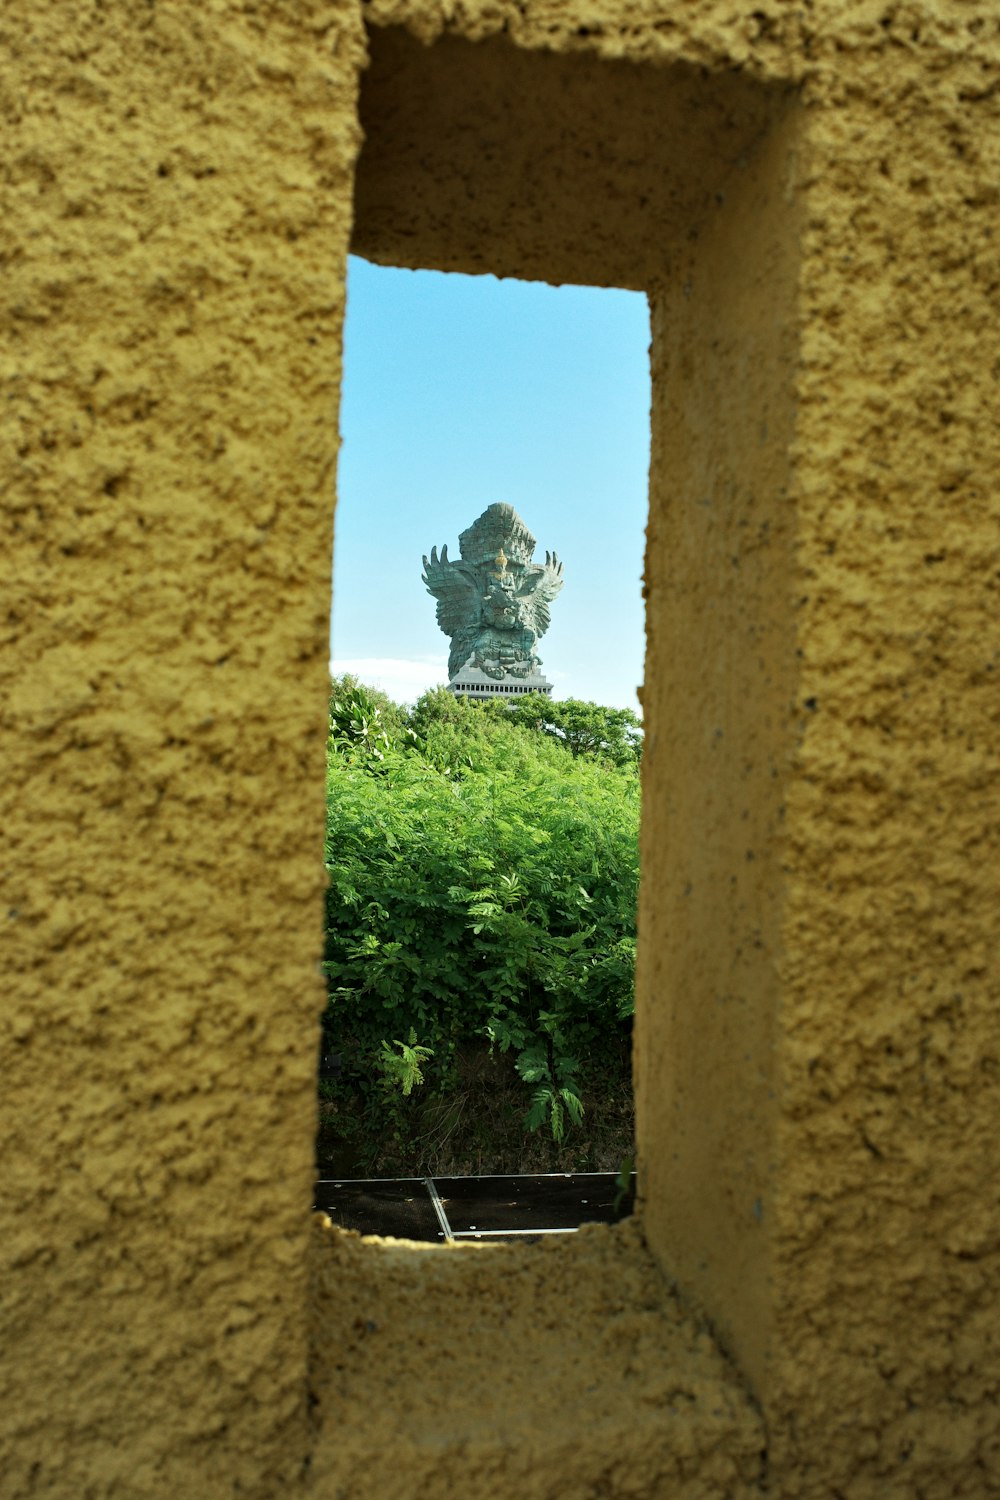 a view of a statue through a hole in a wall